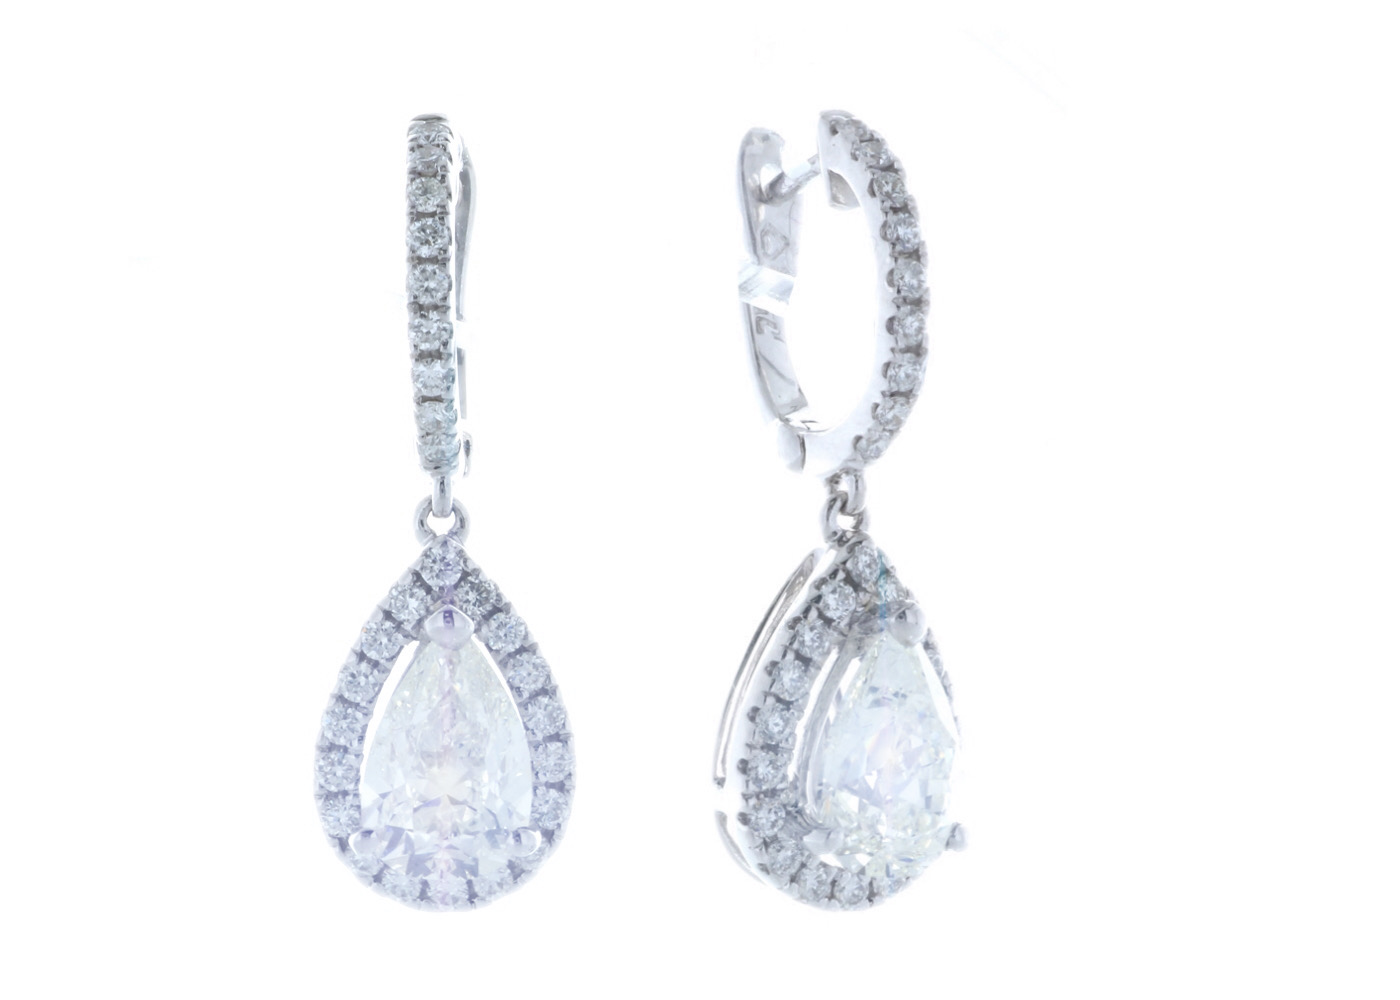 18k White Gold Pear Shape Halo Drop Earring 2.47 Carats - Image 2 of 3